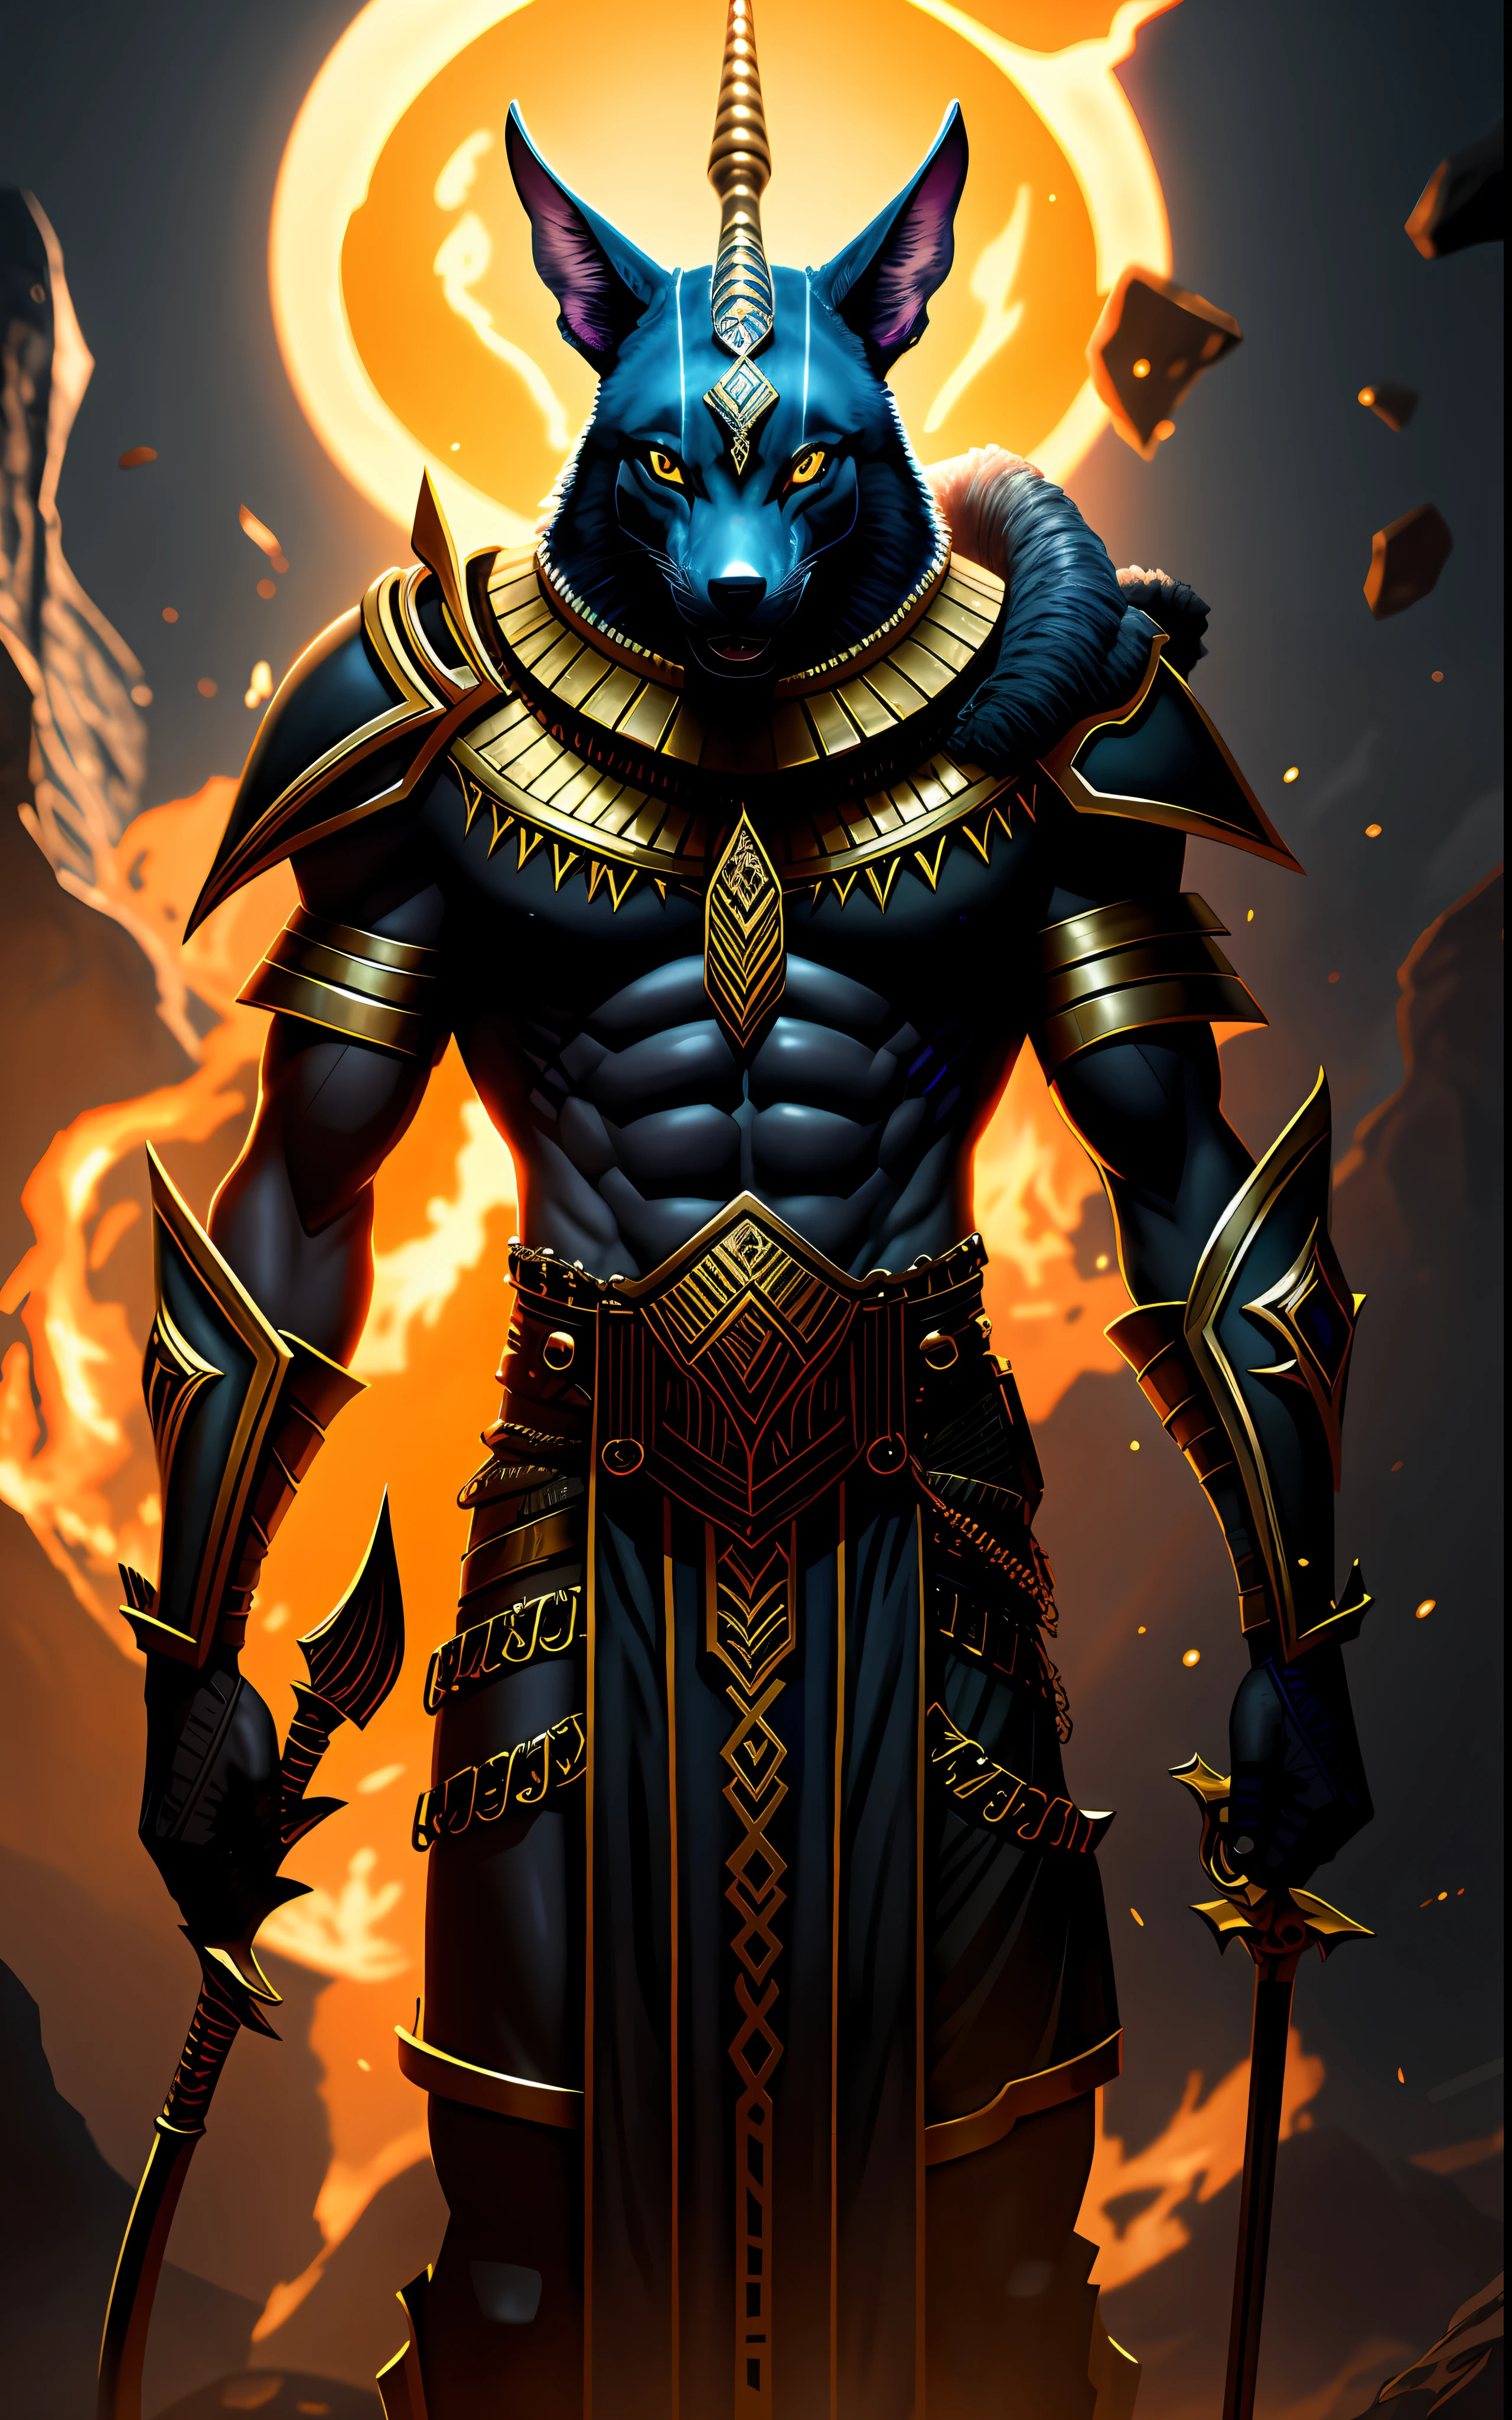 Anubis, Egyptian jackal headed god and holder of golden scales, dynamic pose towards right and dramatic camera angle, oil painting inspired by Lora Fantasy Character Anubis V10, photorealistic and cinematic style, hell gate and fire background, dark and underworld mood, high quality resolution